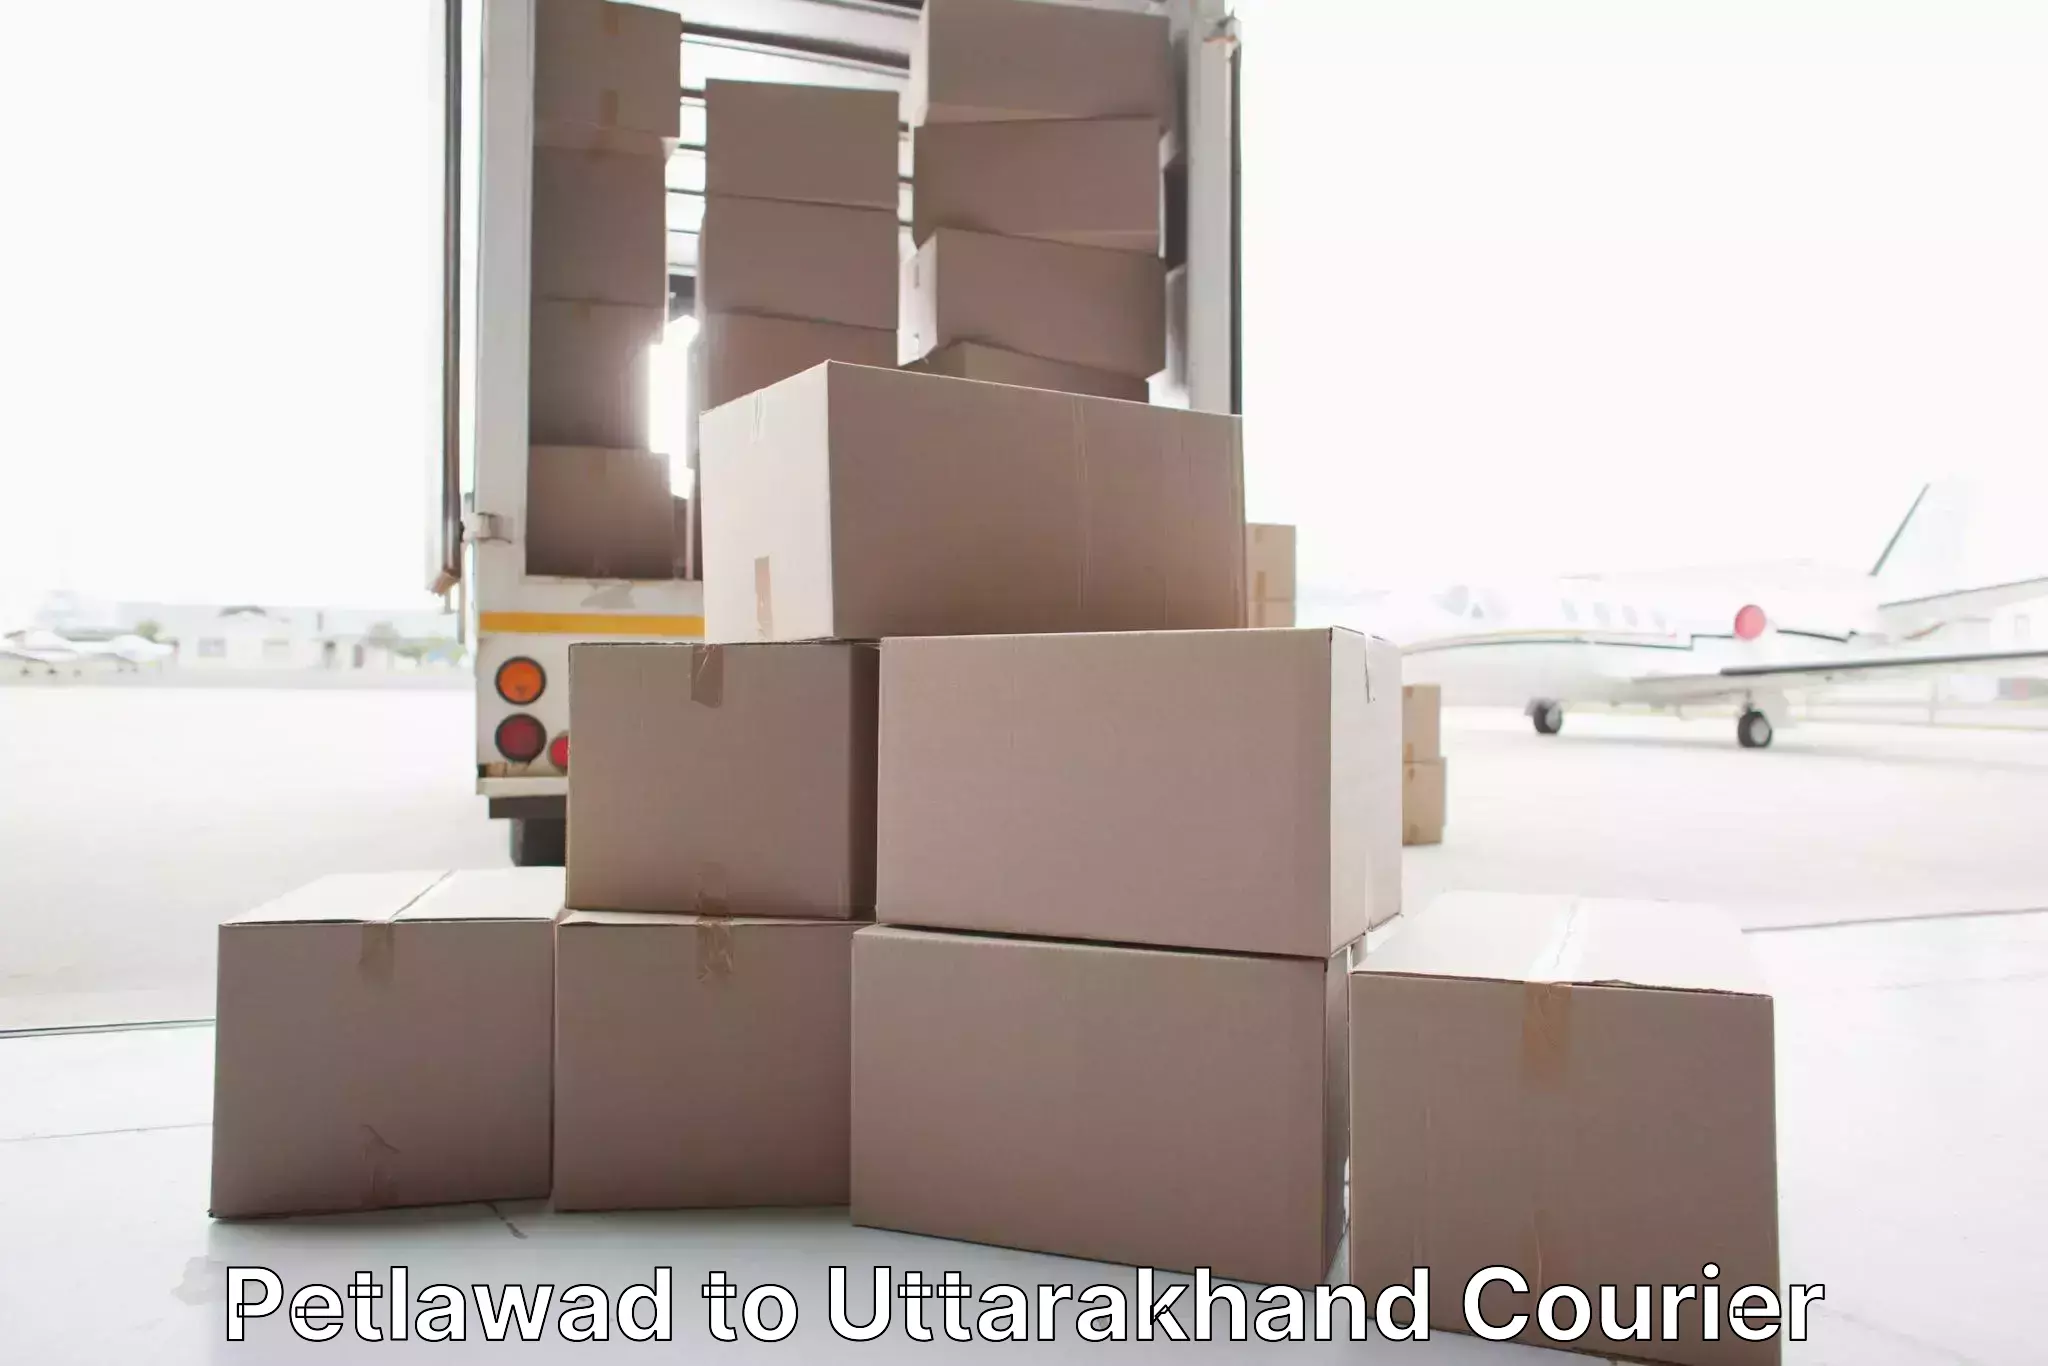 Trusted household movers Petlawad to Rishikesh